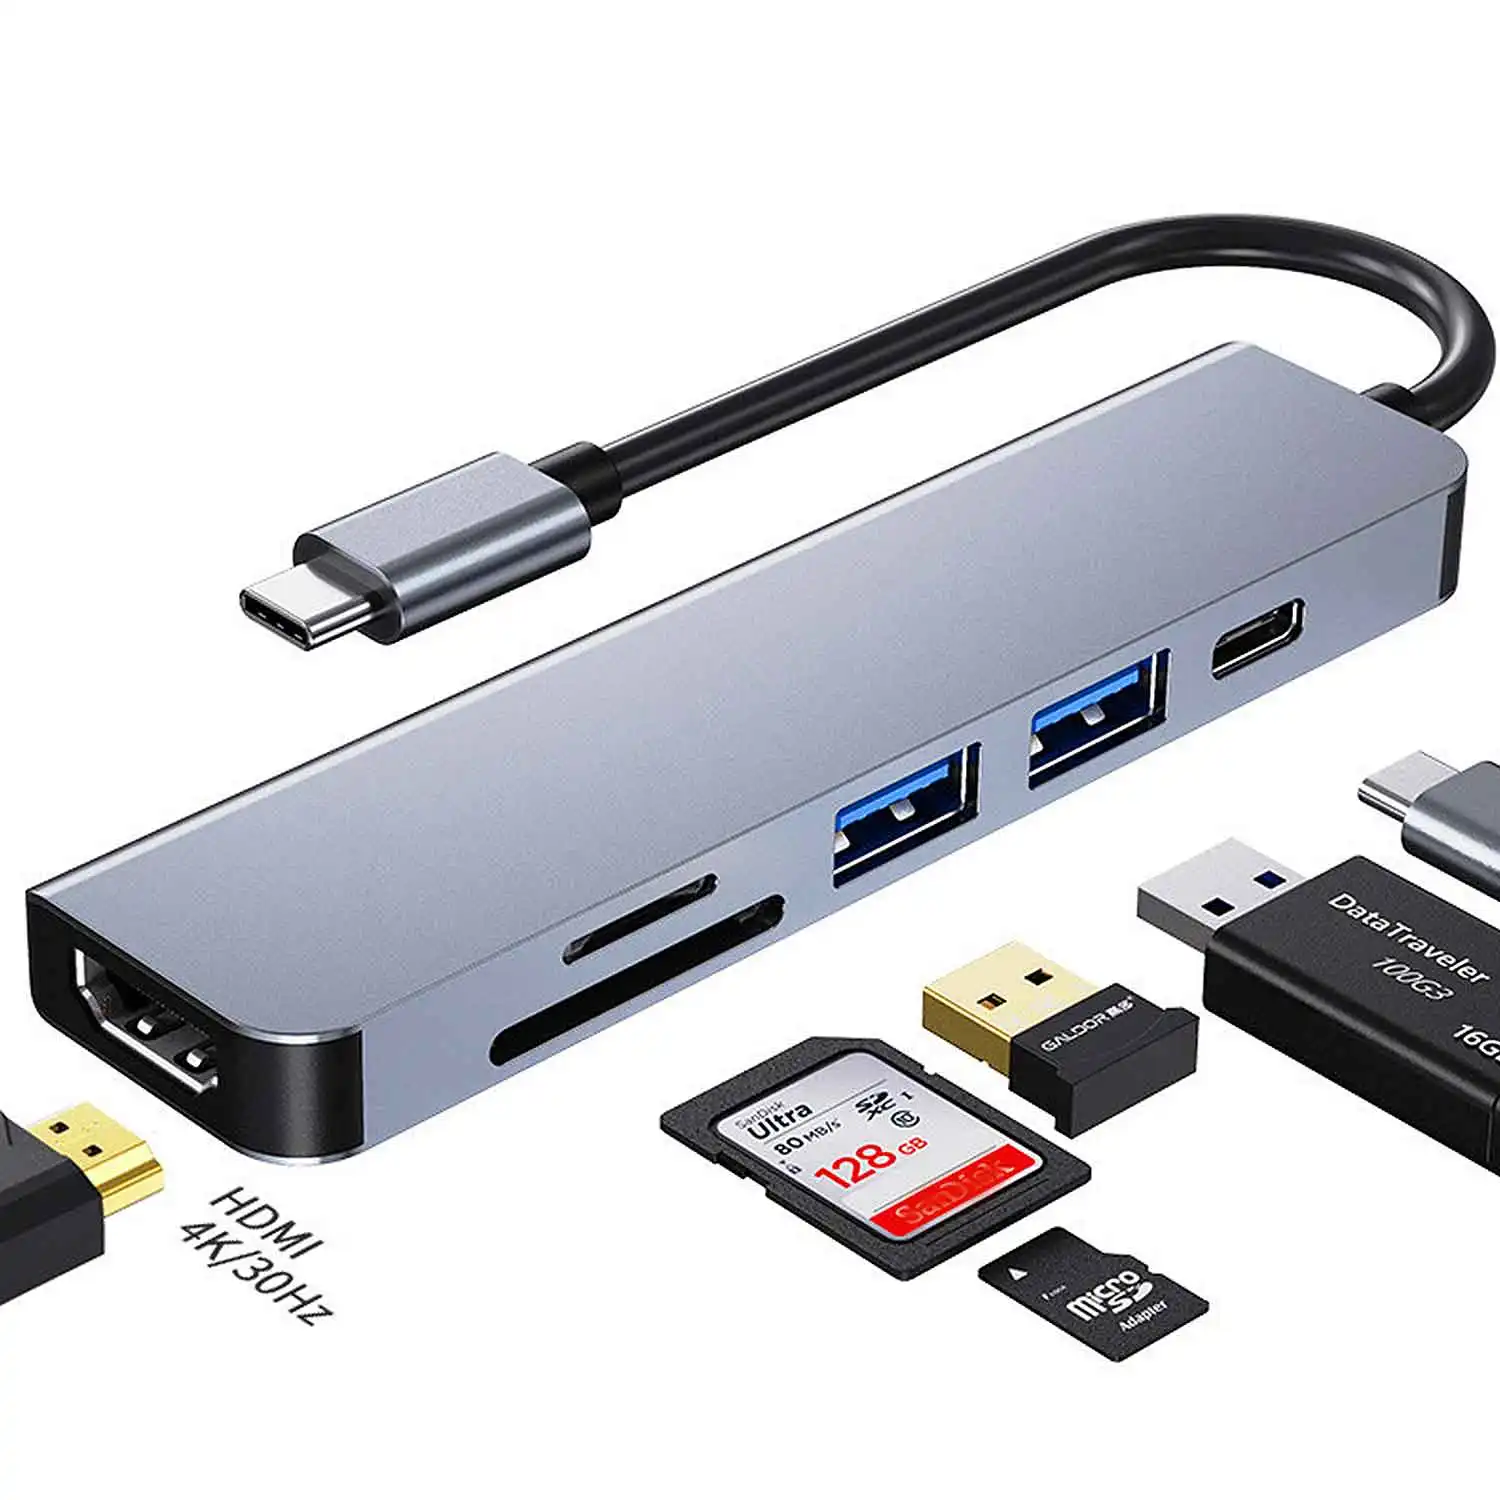 6 in 1 USB Type C Hub Adapter with 4K HDTV Multiport Card Reader USB3.0 TF PD SD Reader All In One For PC Computer Accessories